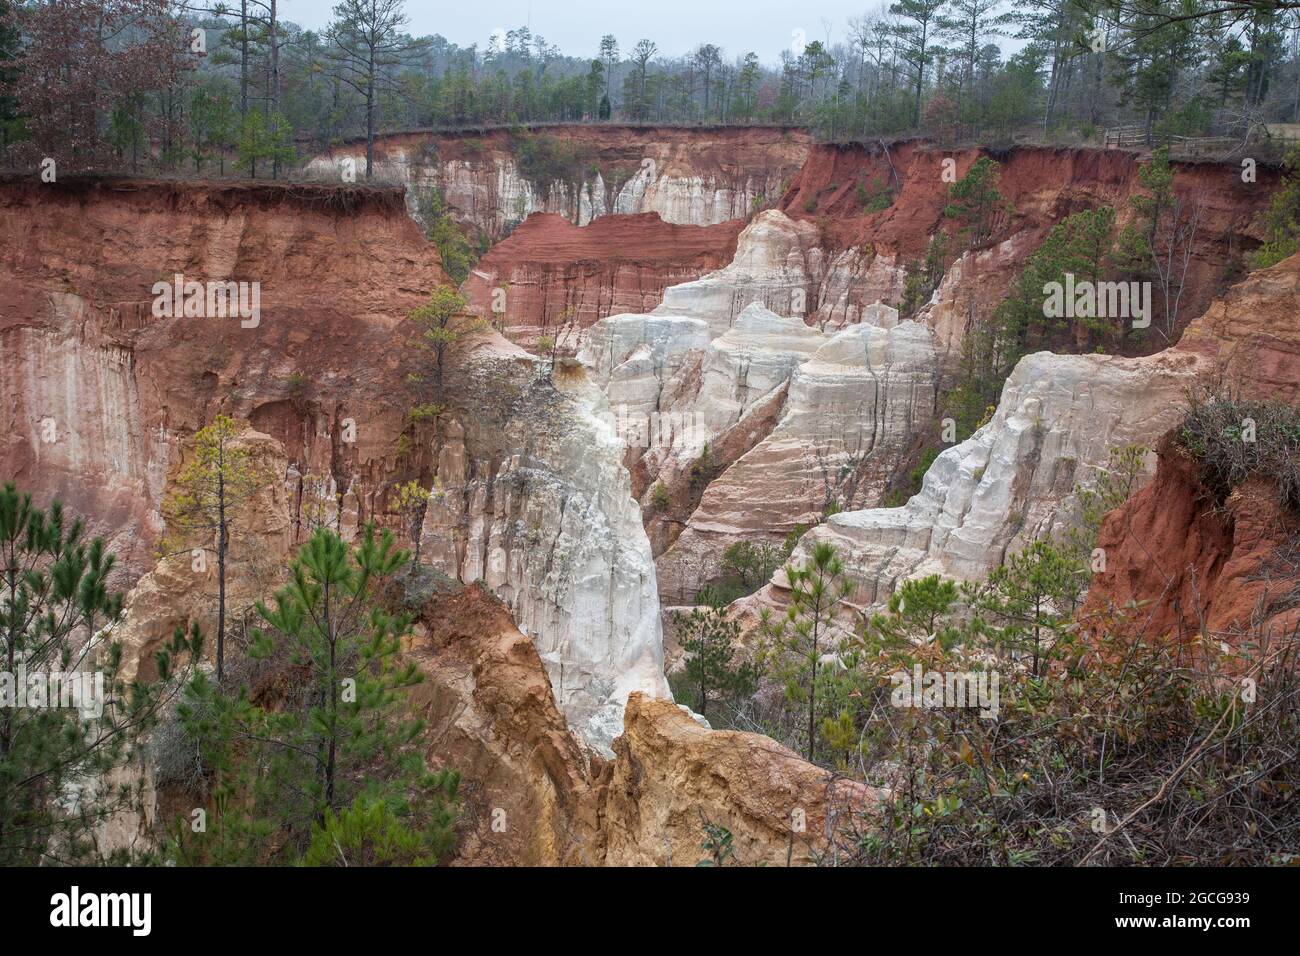 Poor farming practices in the 1800's caused the erosion at Providence Canyon, Georgia (U.S. state). Stock Photo